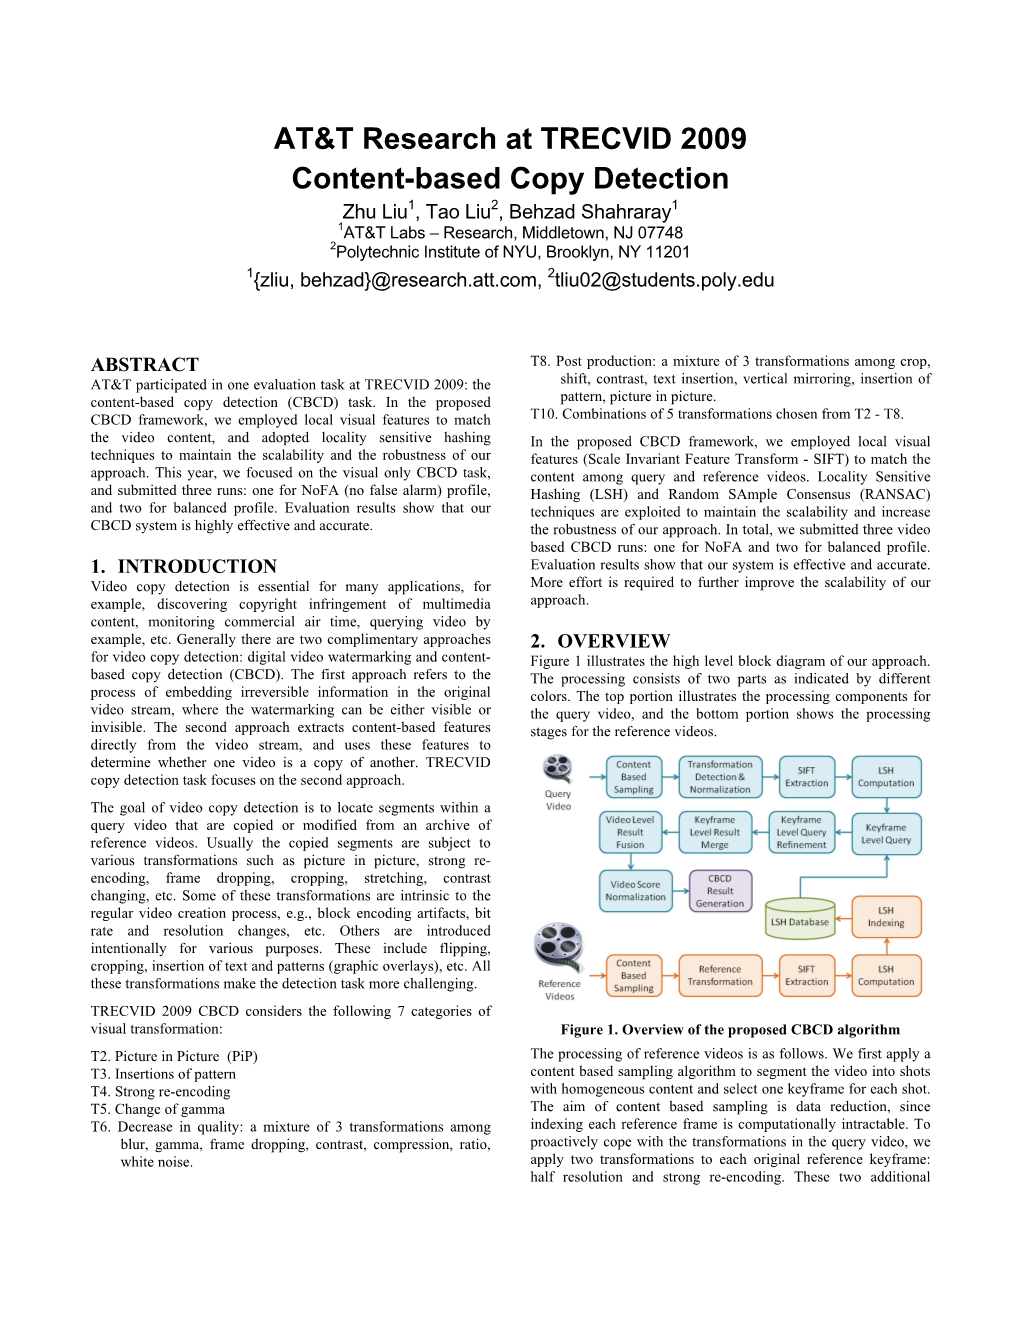 AT&T Research at TRECVID 2009 Content-Based Copy Detection